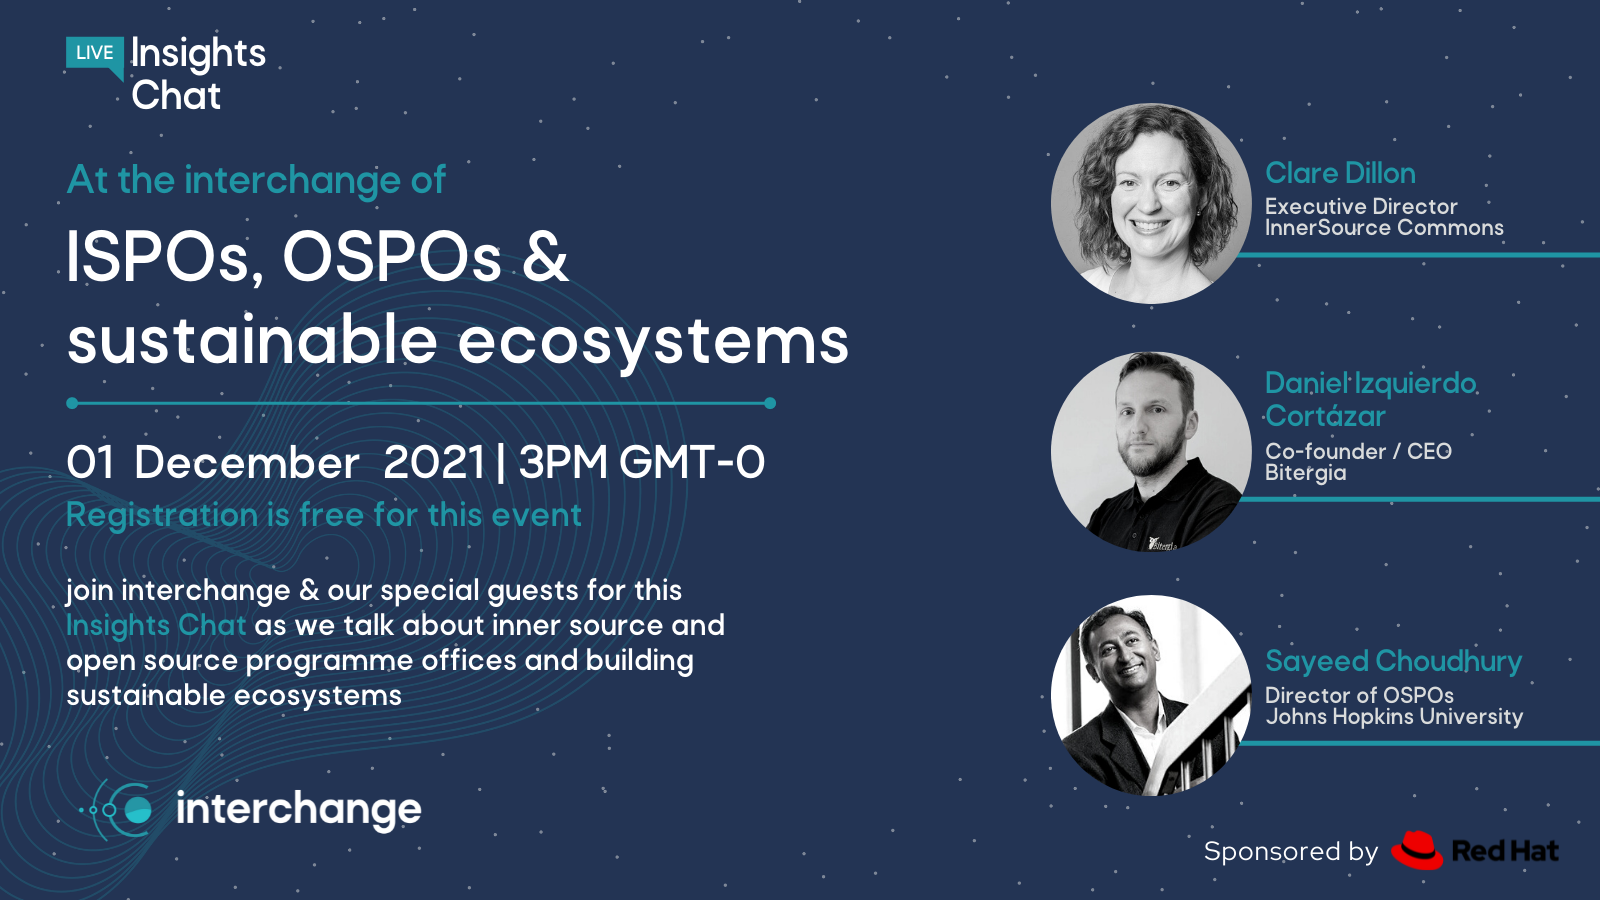 How an ISPO or OSPO can help to build a sustainable ecosystem